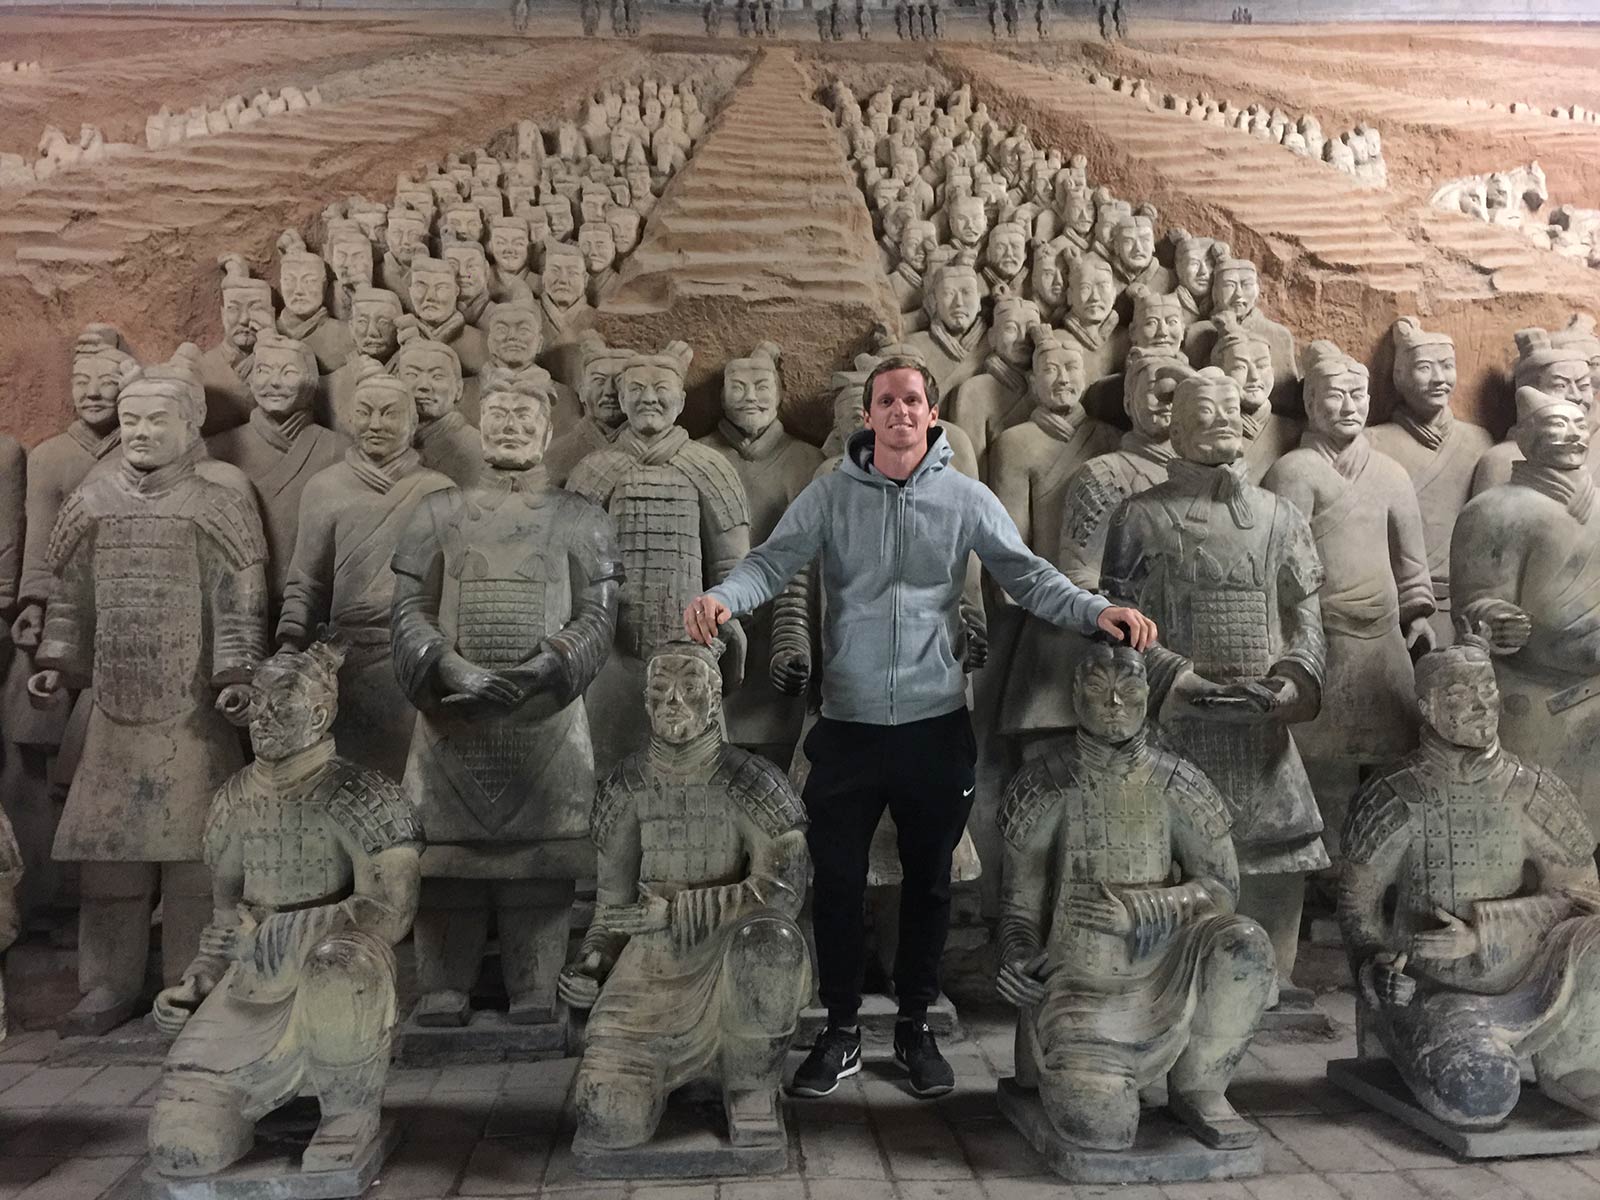 David Simpson standing with the terracotta warriors in Xi'an, China. The terracotta warriors